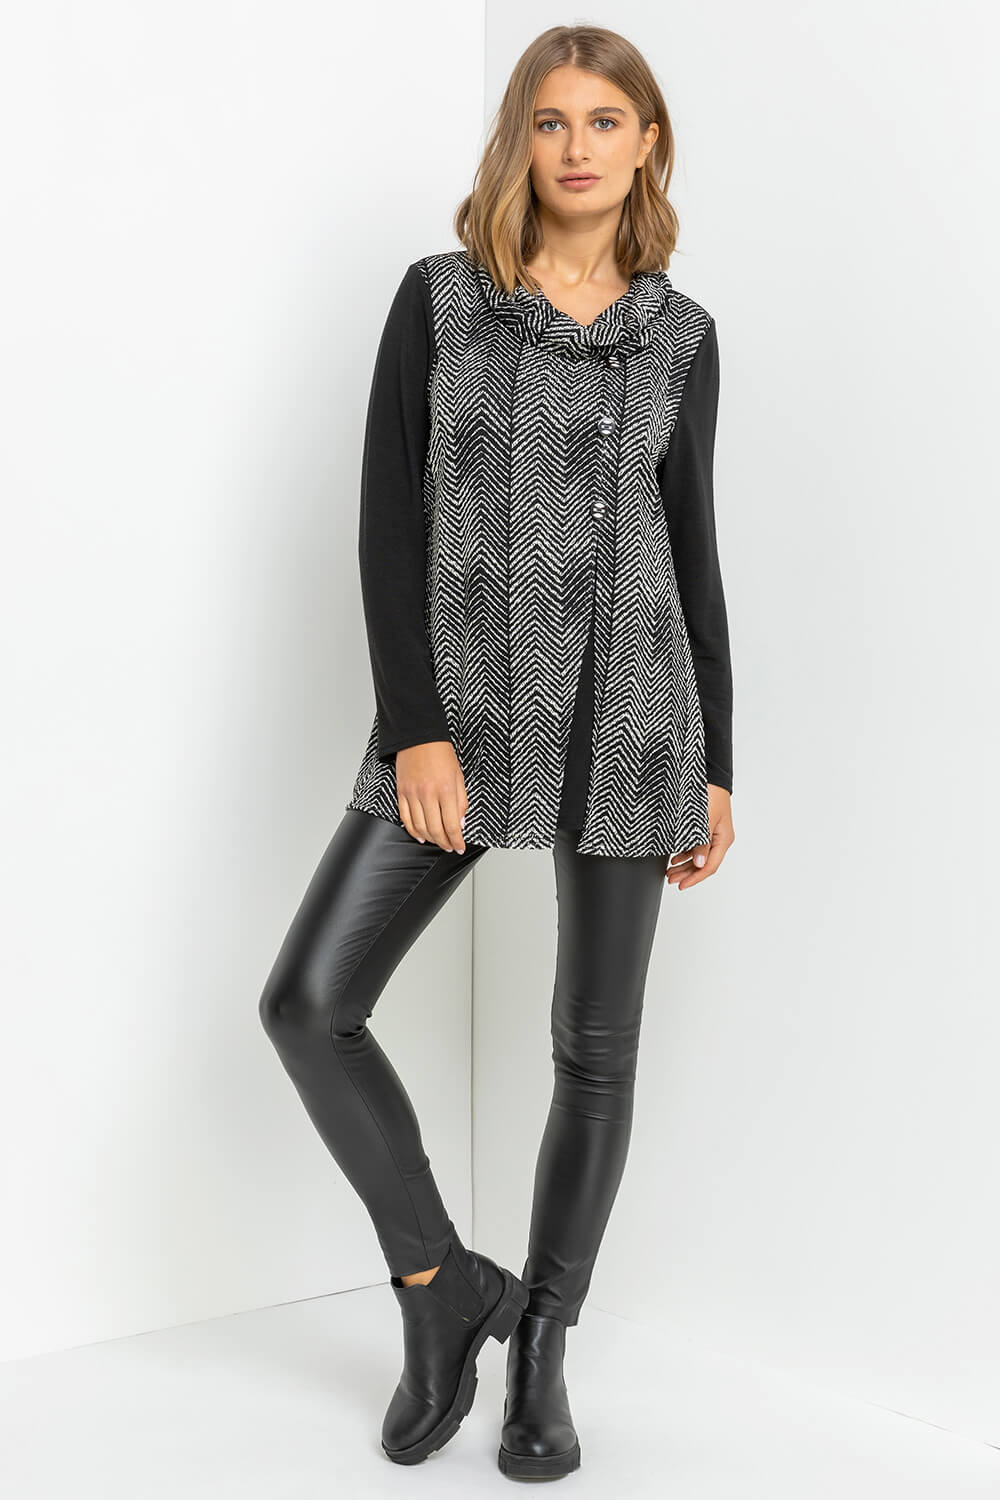 Black Zig Zag Cowl Neck Button Top, Image 3 of 4